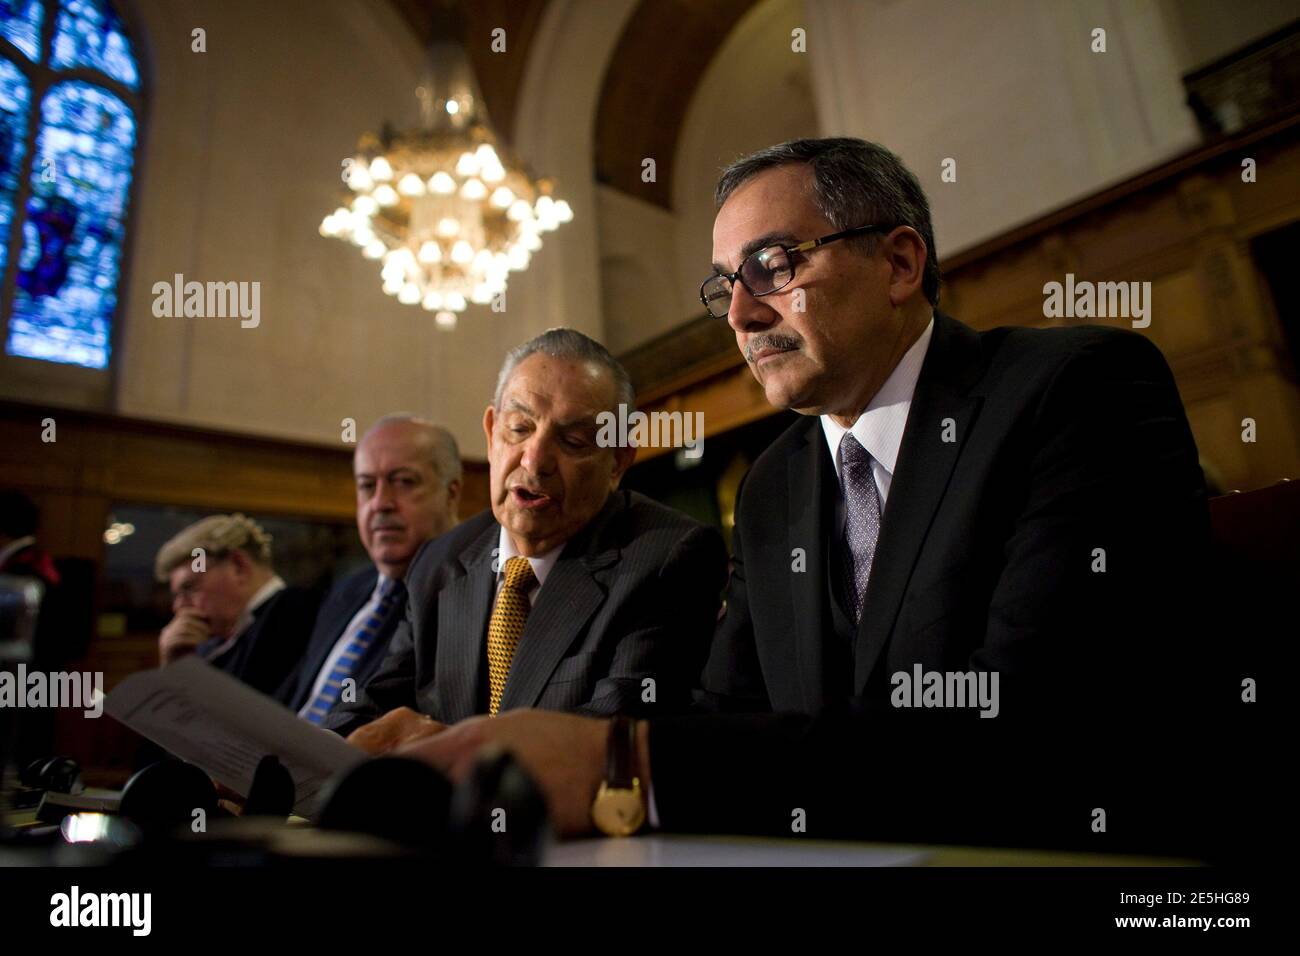 Costa Rica's Foreign Minister Rene Castro Salazar (R), members of the Costa  Rica legal team, Edgar Ugalde Alavarez (C) and Jorge Ubrina await the start  of hearings at the International Court of